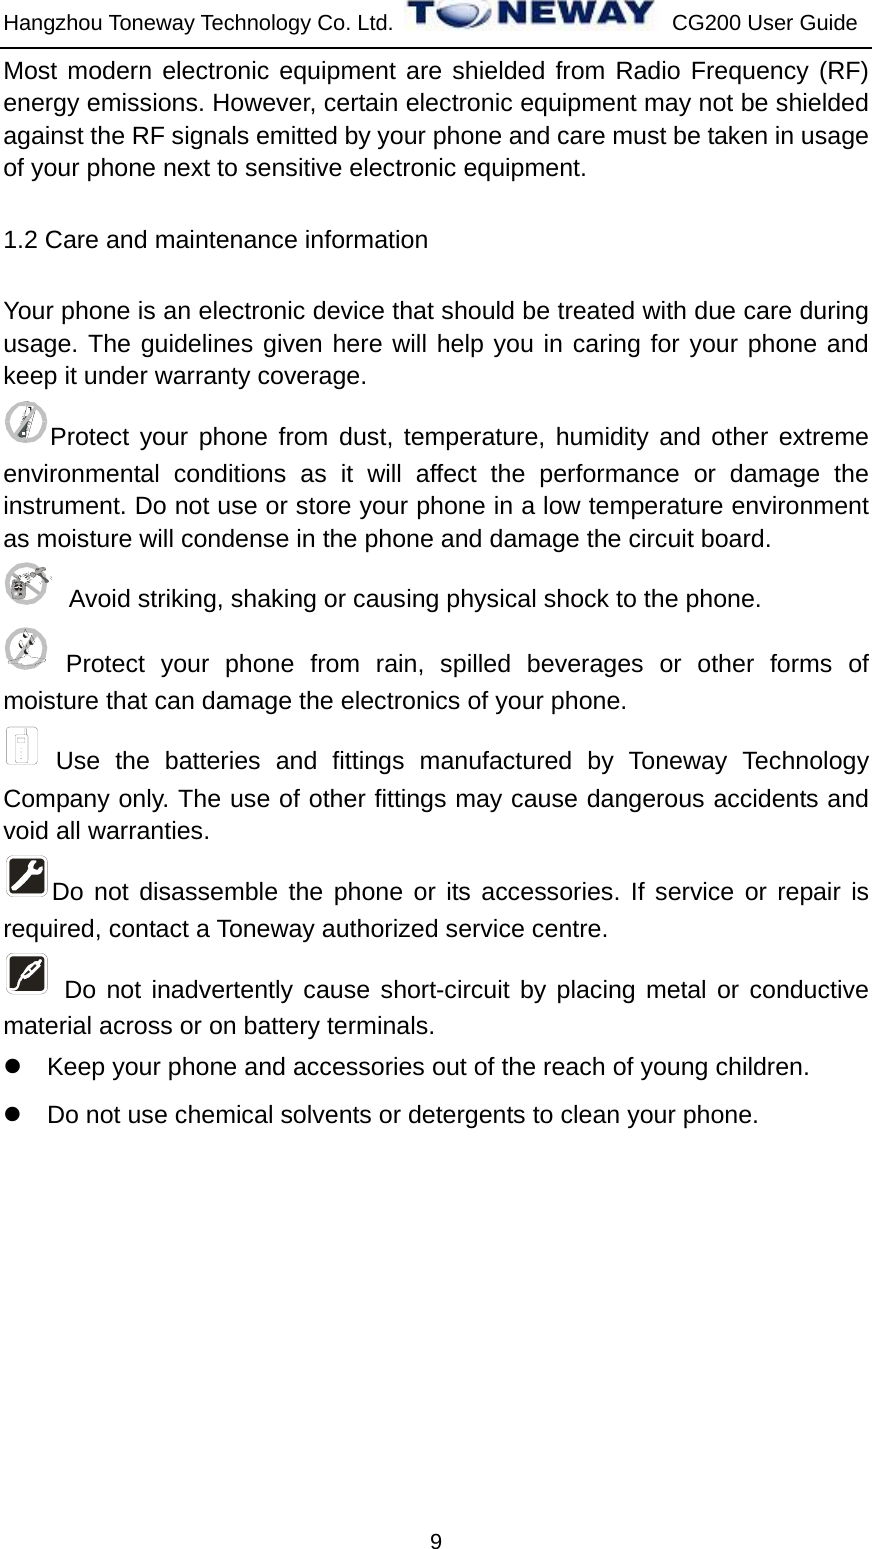 Hangzhou Toneway Technology Co. Ltd.    CG200 User Guide 9 Most modern electronic equipment are shielded from Radio Frequency (RF) energy emissions. However, certain electronic equipment may not be shielded against the RF signals emitted by your phone and care must be taken in usage of your phone next to sensitive electronic equipment. 1.2 Care and maintenance information   Your phone is an electronic device that should be treated with due care during usage. The guidelines given here will help you in caring for your phone and keep it under warranty coverage. Protect your phone from dust, temperature, humidity and other extreme environmental conditions as it will affect the performance or damage the instrument. Do not use or store your phone in a low temperature environment as moisture will condense in the phone and damage the circuit board.   Avoid striking, shaking or causing physical shock to the phone.    Protect your phone from rain, spilled beverages or other forms of moisture that can damage the electronics of your phone.  Use the batteries and fittings manufactured by Toneway Technology Company only. The use of other fittings may cause dangerous accidents and void all warranties. Do not disassemble the phone or its accessories. If service or repair is required, contact a Toneway authorized service centre.    Do not inadvertently cause short-circuit by placing metal or conductive material across or on battery terminals. z  Keep your phone and accessories out of the reach of young children. z  Do not use chemical solvents or detergents to clean your phone.   